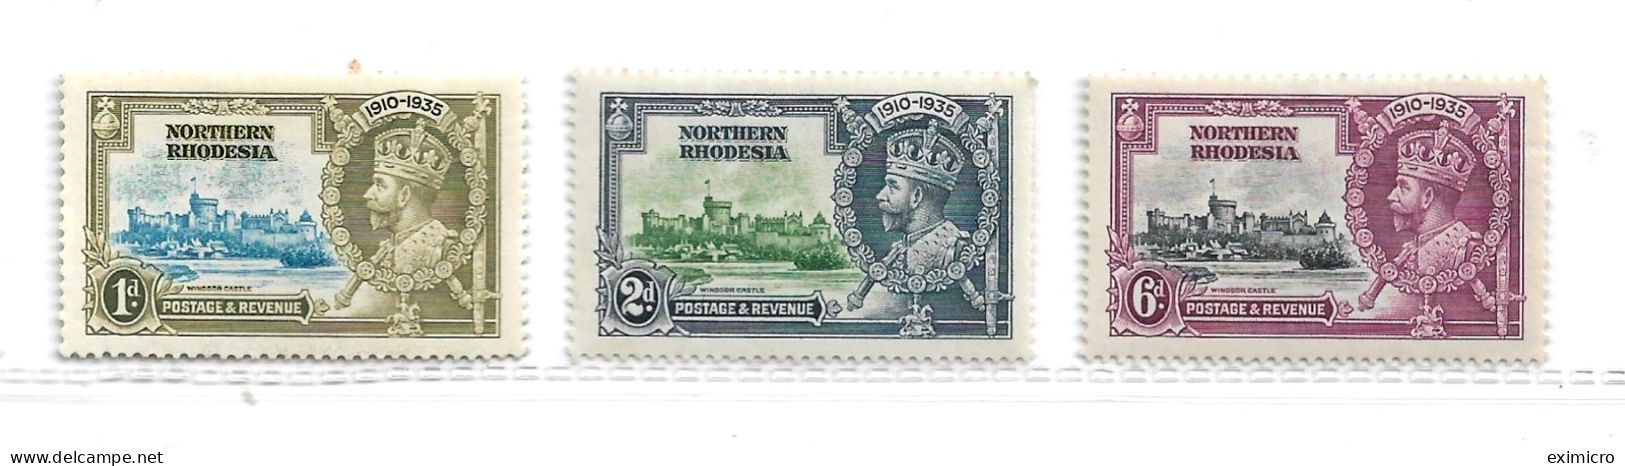 NORTHERN RHODESIA 1935 1d, 2d, 6d SILVER JUBILEE STAMPS SG 18, 19, 21. MOUNTED MINT Cat £23.50 - Northern Rhodesia (...-1963)